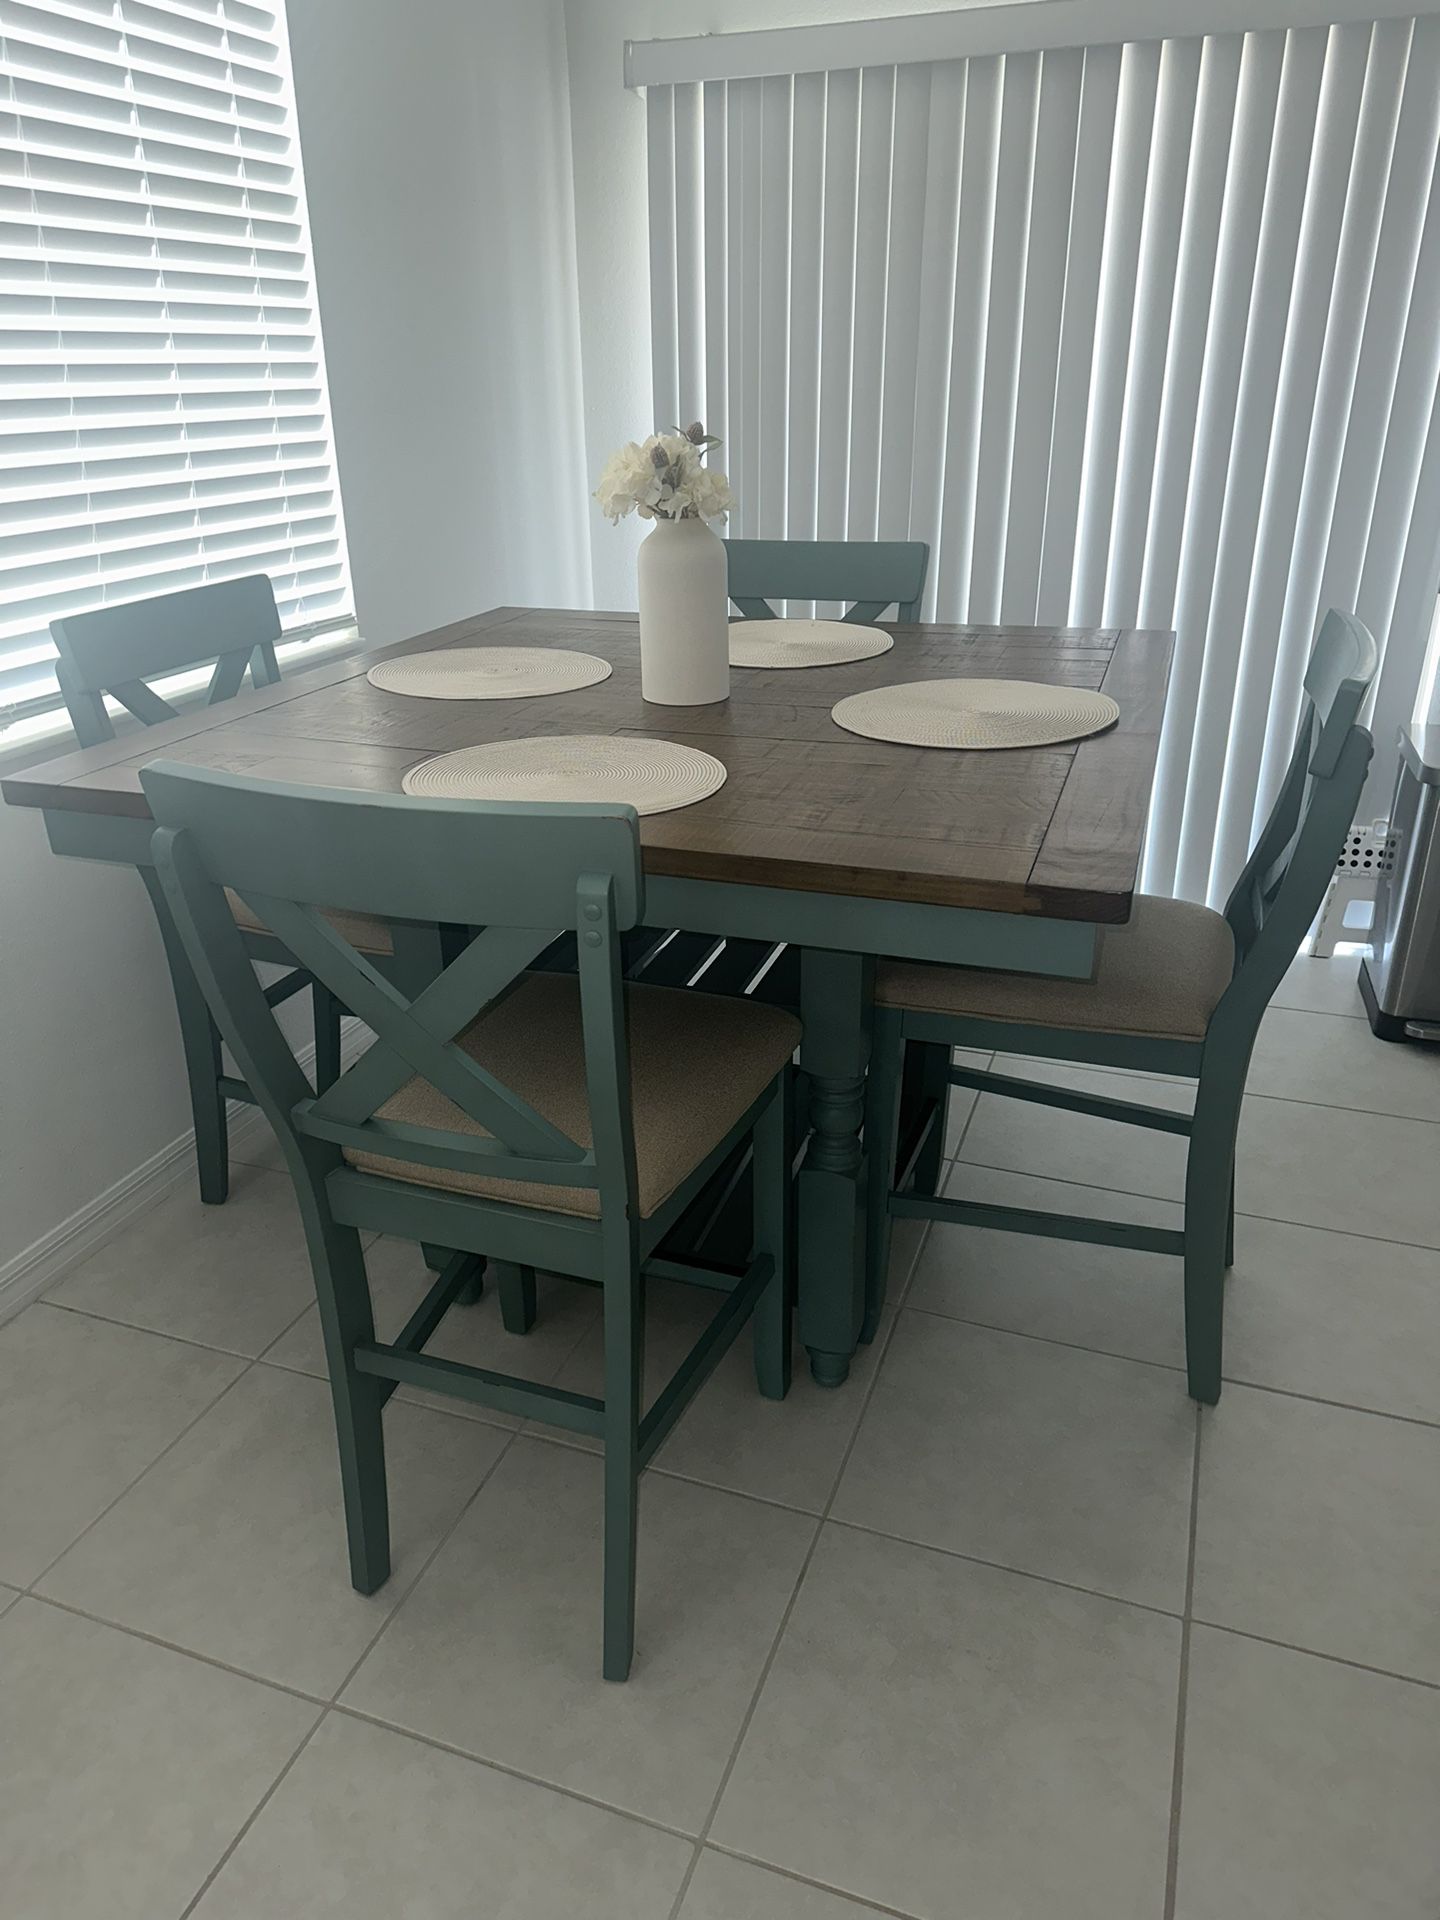 Dining Table And Four Chairs.